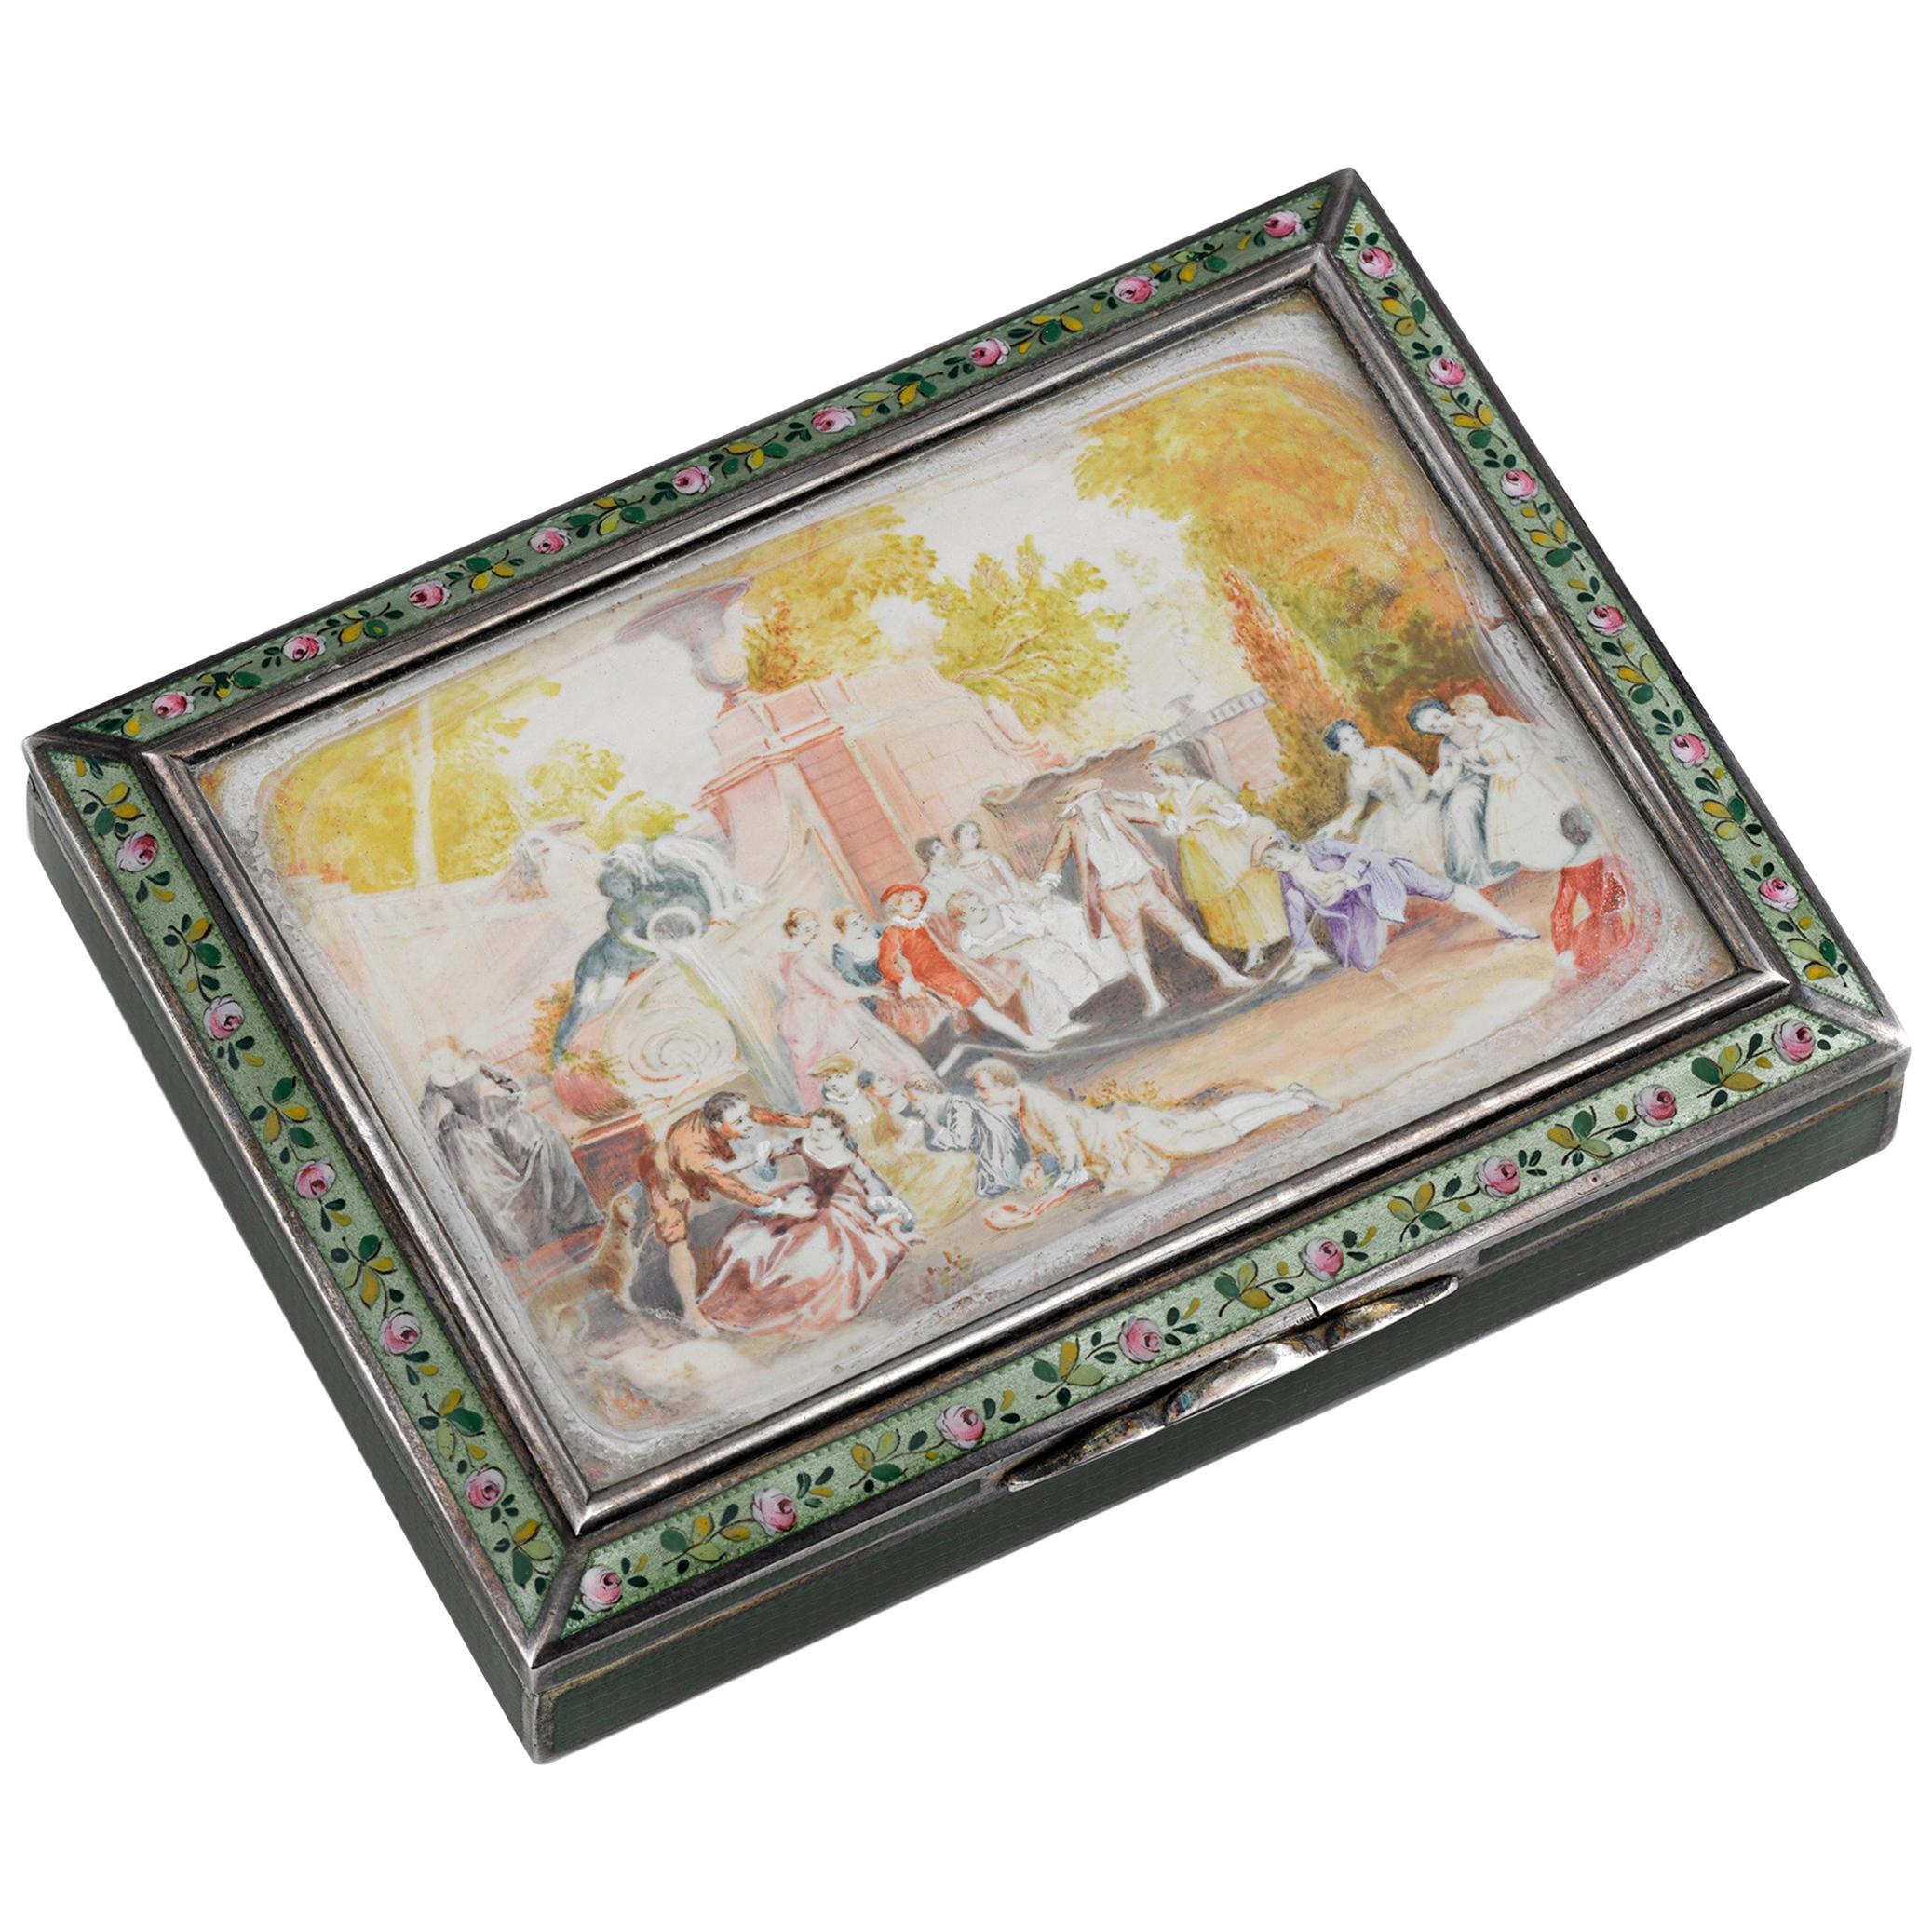 Viennese Silver and Enamel Snuffbox